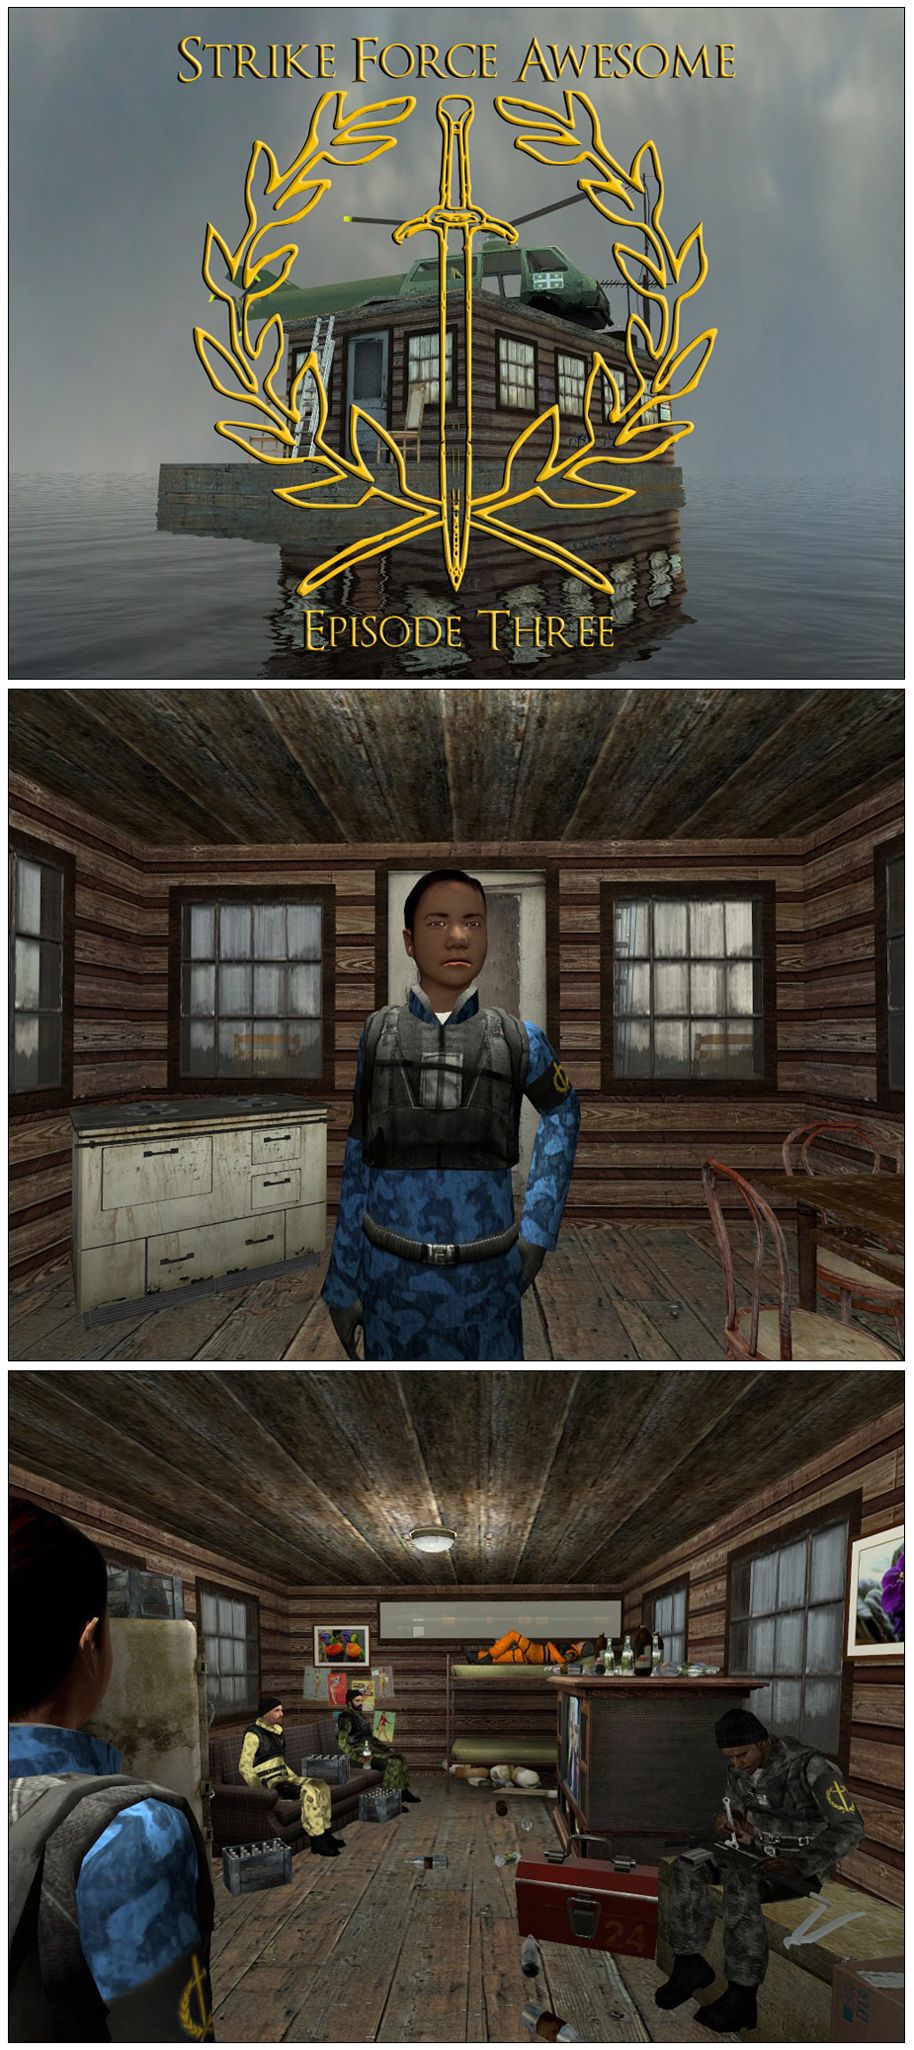 Inside the houseboat, Sergeant Nguyen stares at the rest of the team, sitting around the houseboat loafing. Colonel Lightfoot and the lieutenant are watching a movie on a large old TV. There's a bunch of trash sprewn across the floor.